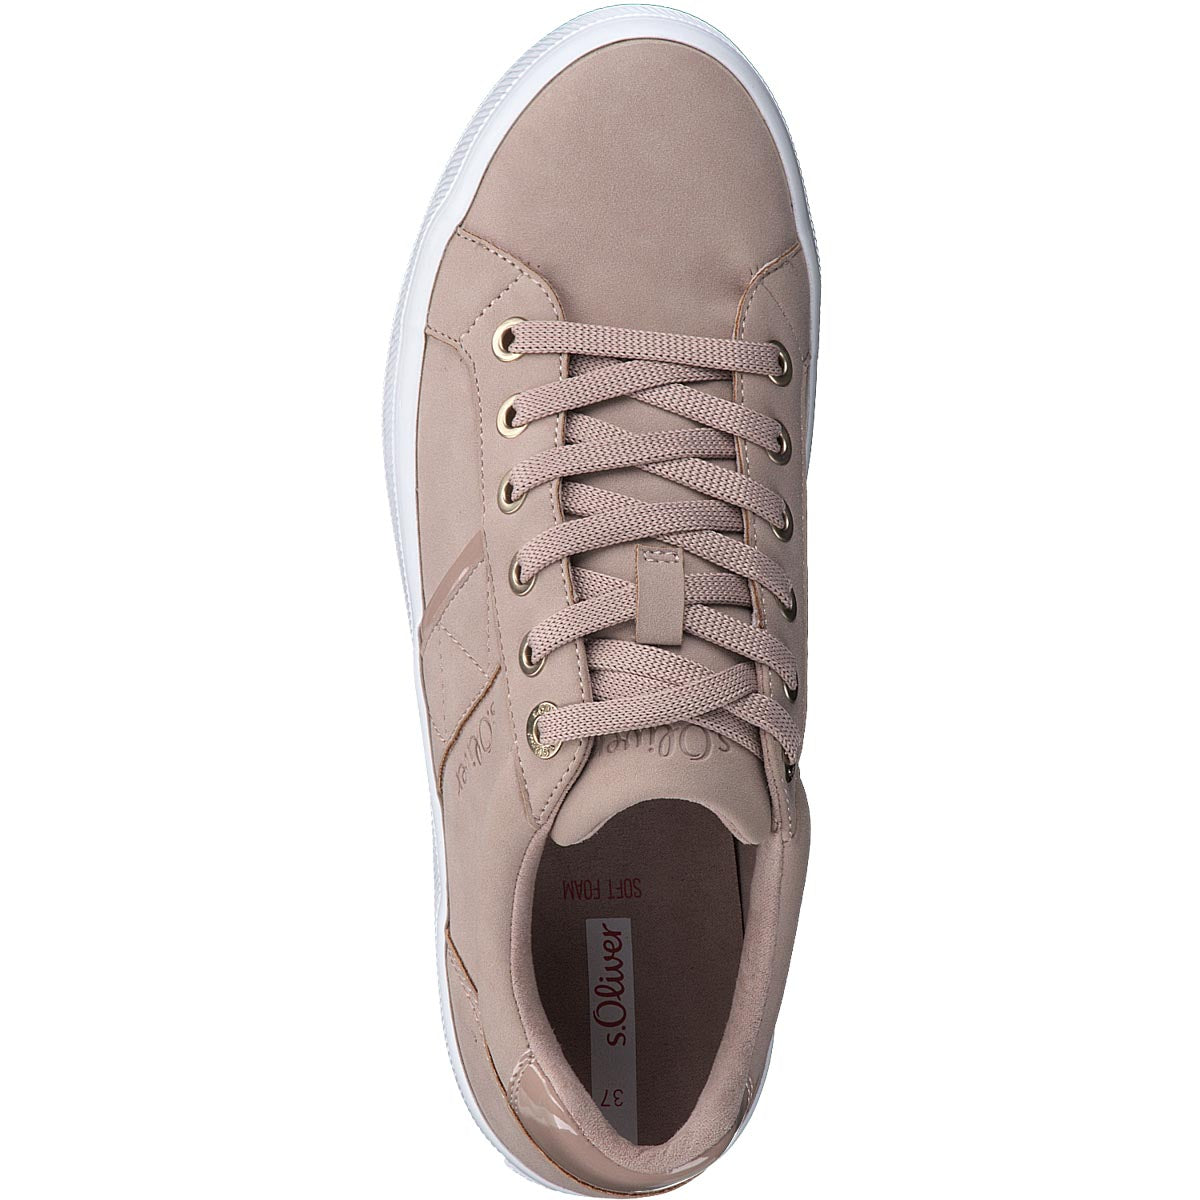 Dress to Impress Lace-Up Soft Pink Runners